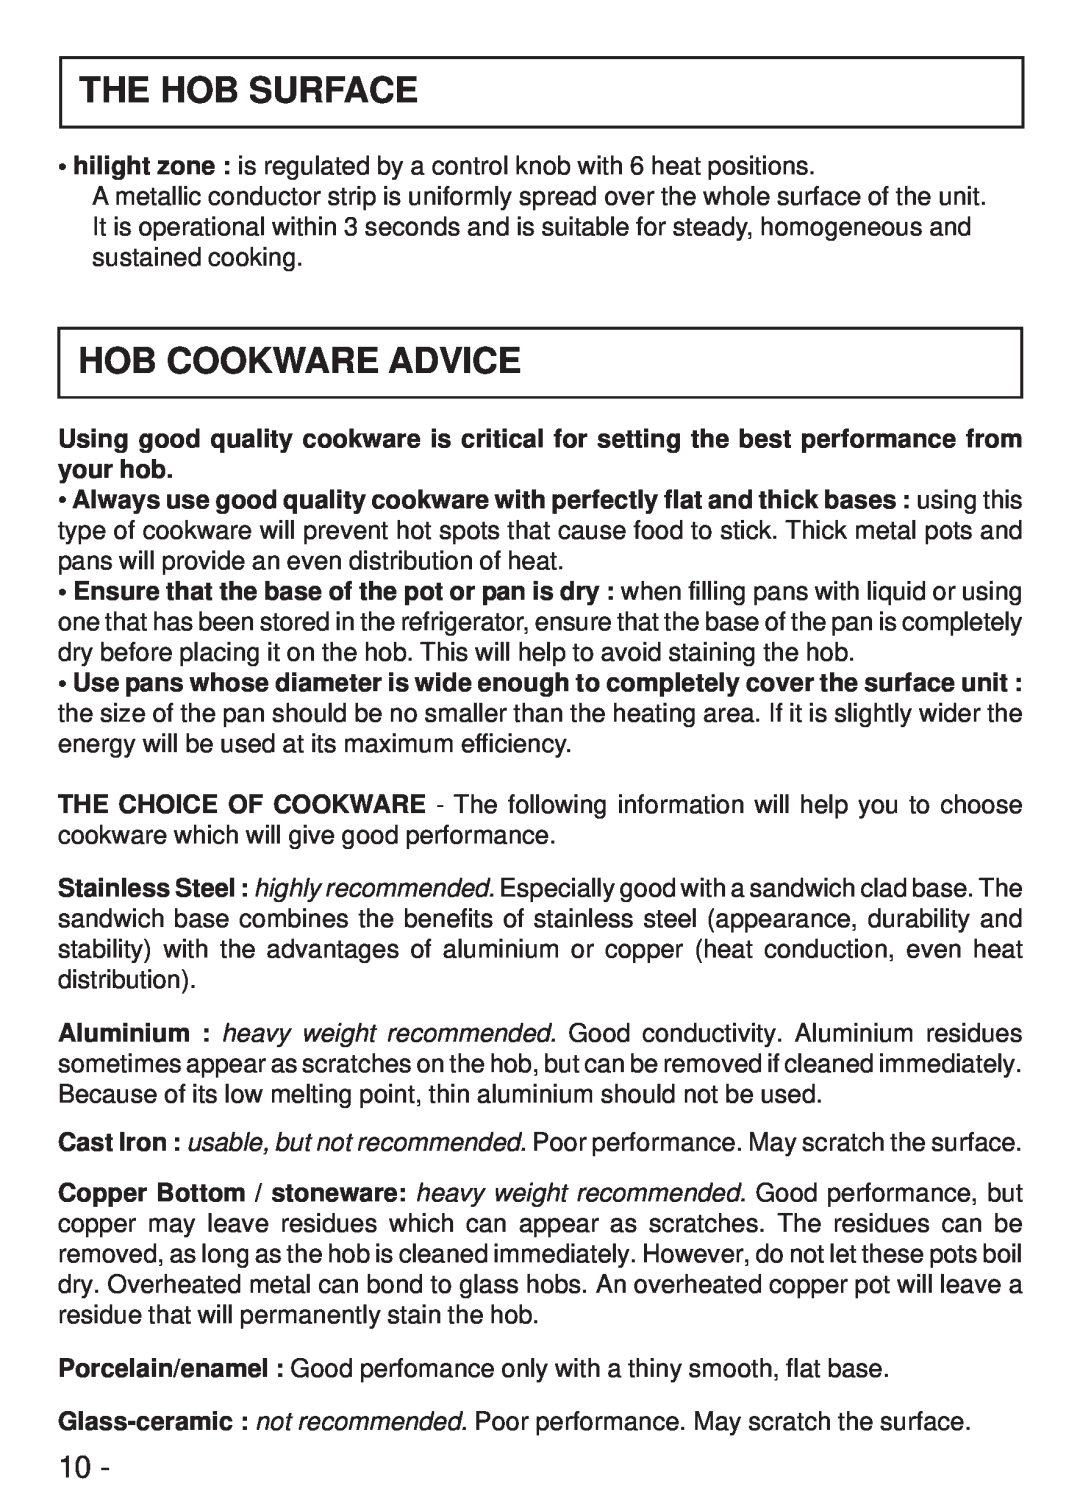 Hoover HVK 400 manual The Hob Surface, Hob Cookware Advice 